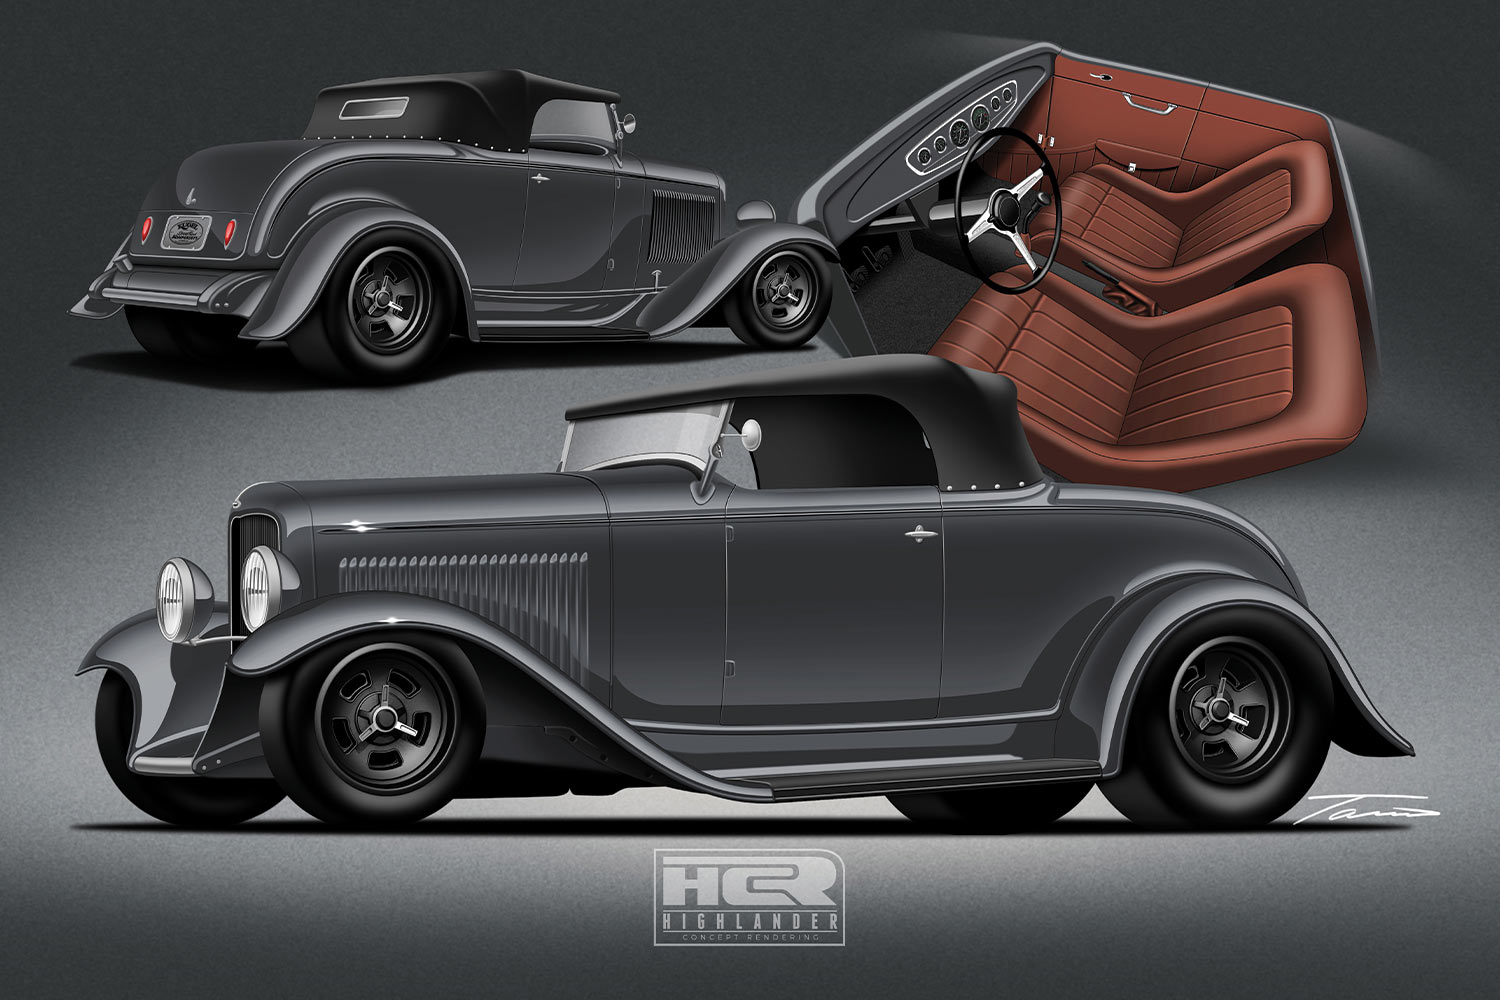 a digital rendering of the gray ’32 Ford roadster's drivers side, passenger side rear and cabin seating